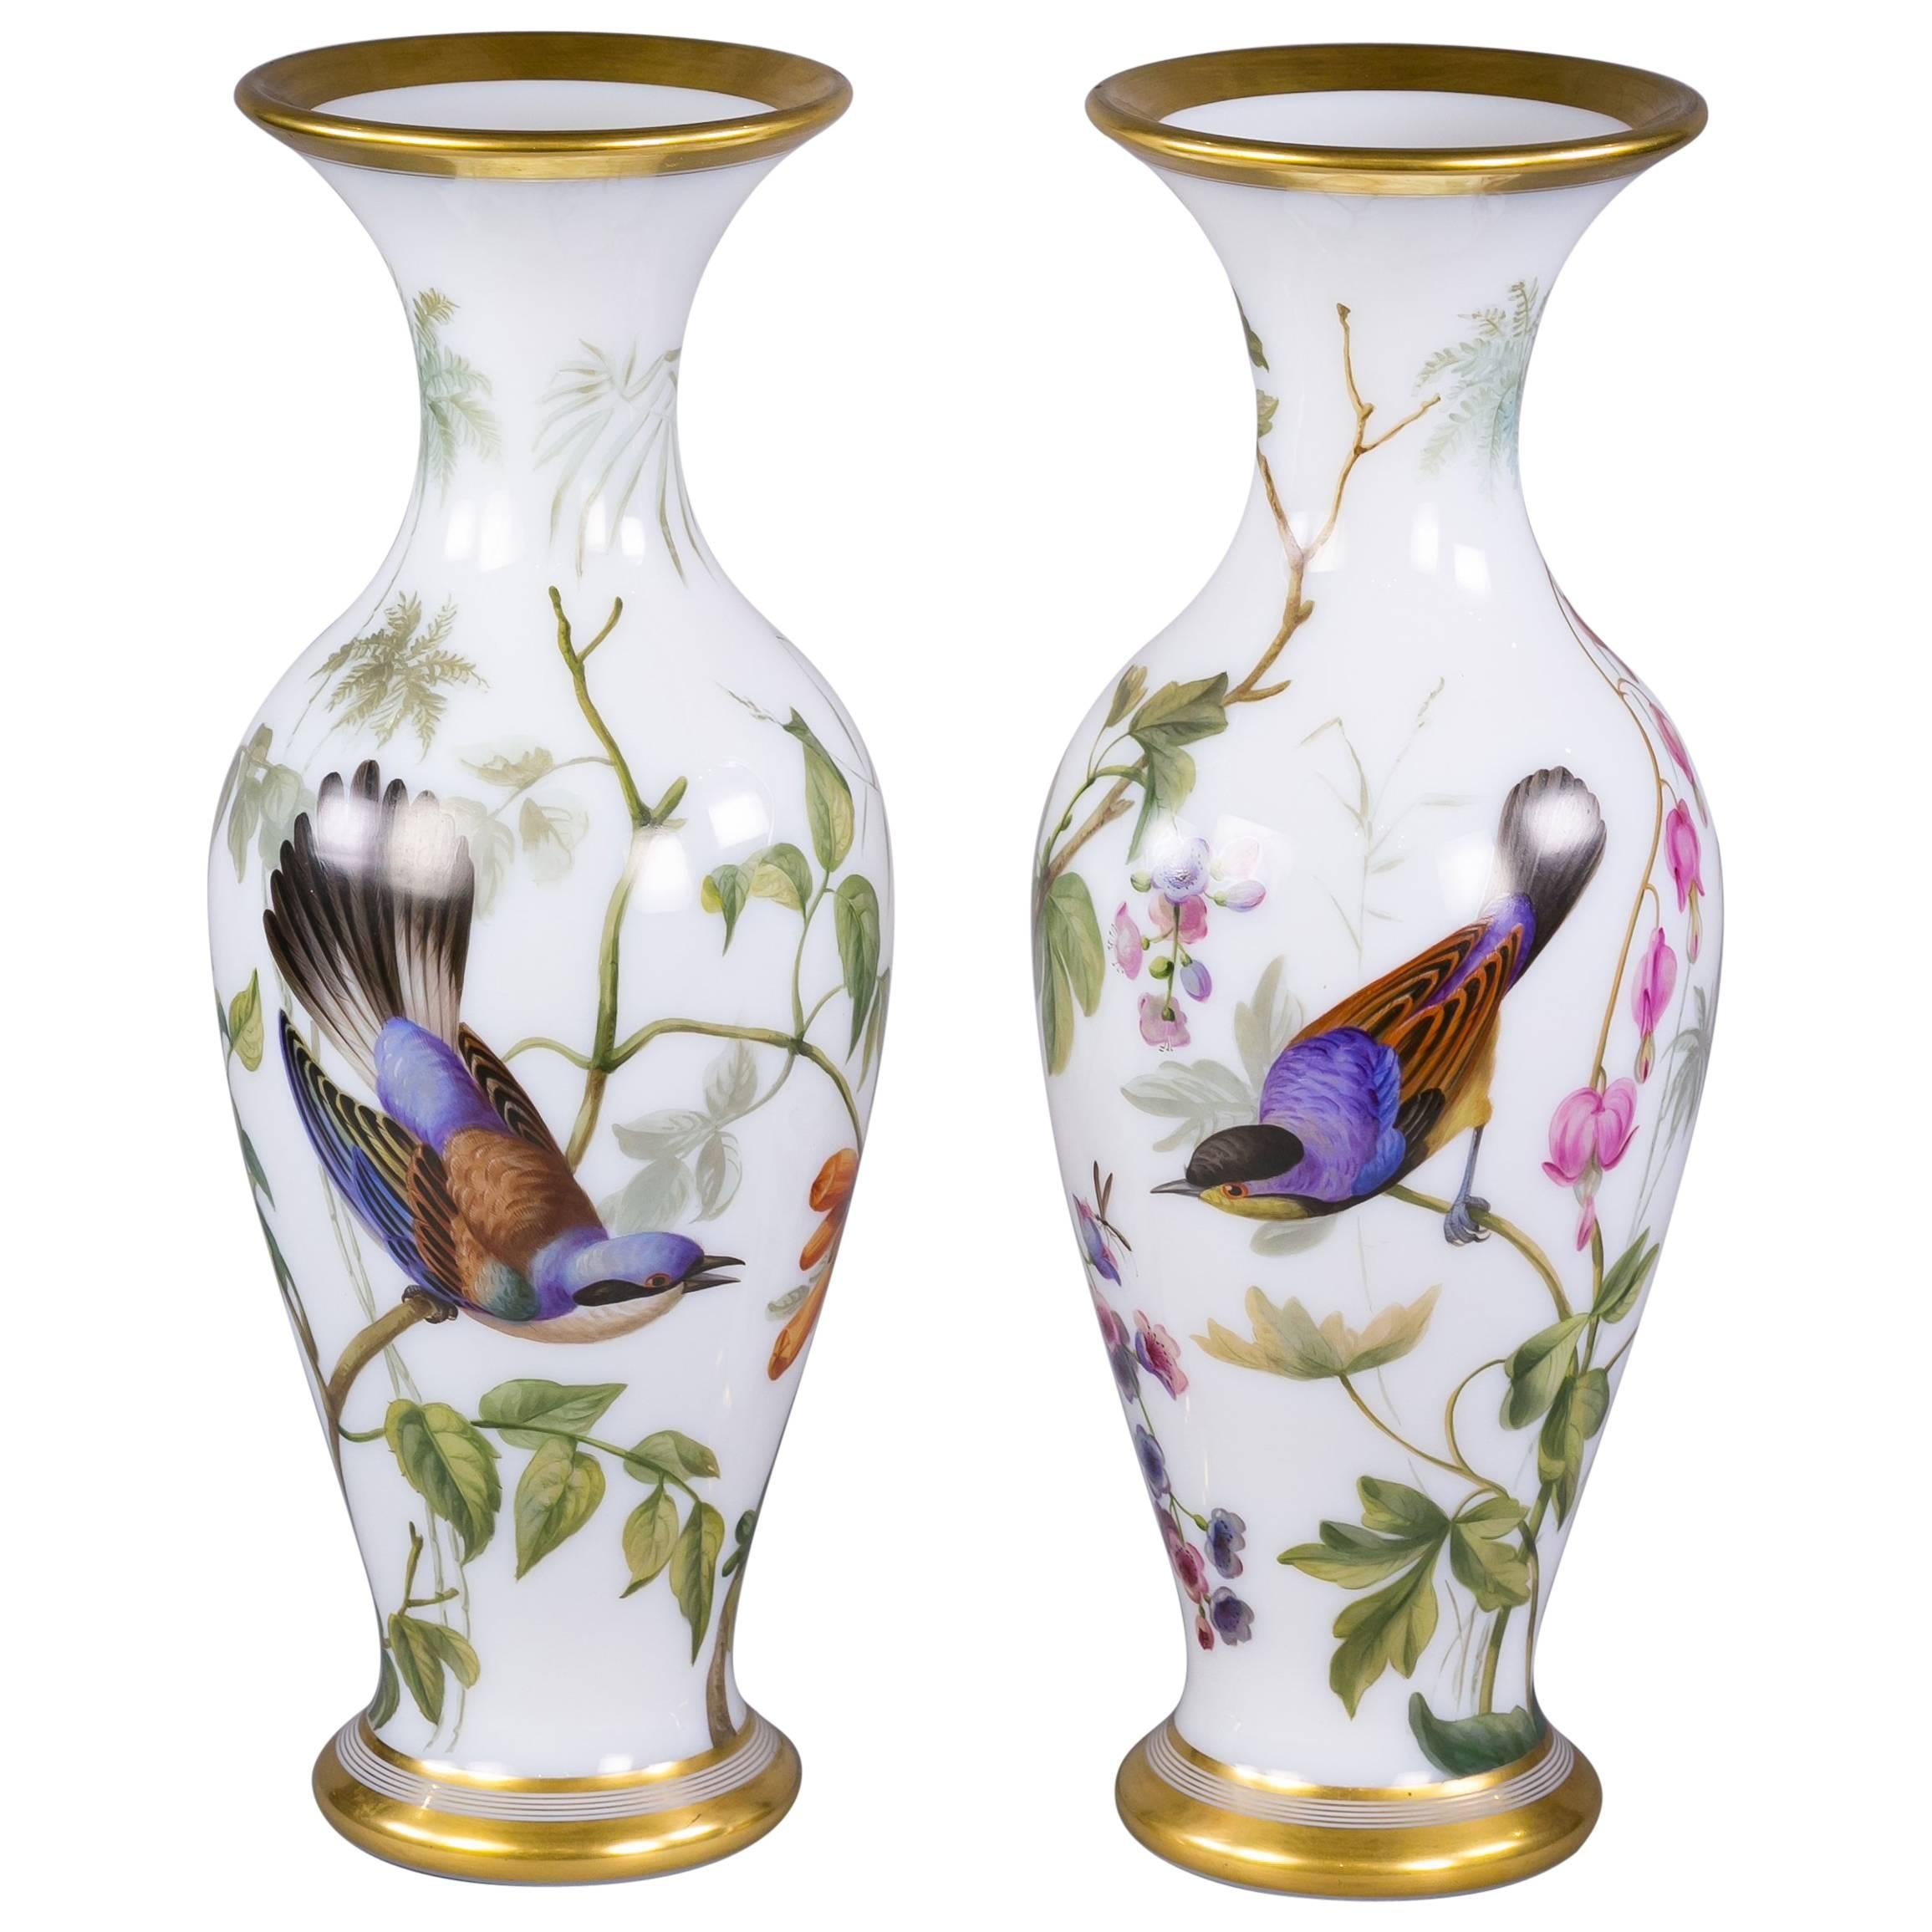 Pair of French Opaline Vases, Baccarat, circa 1835 For Sale